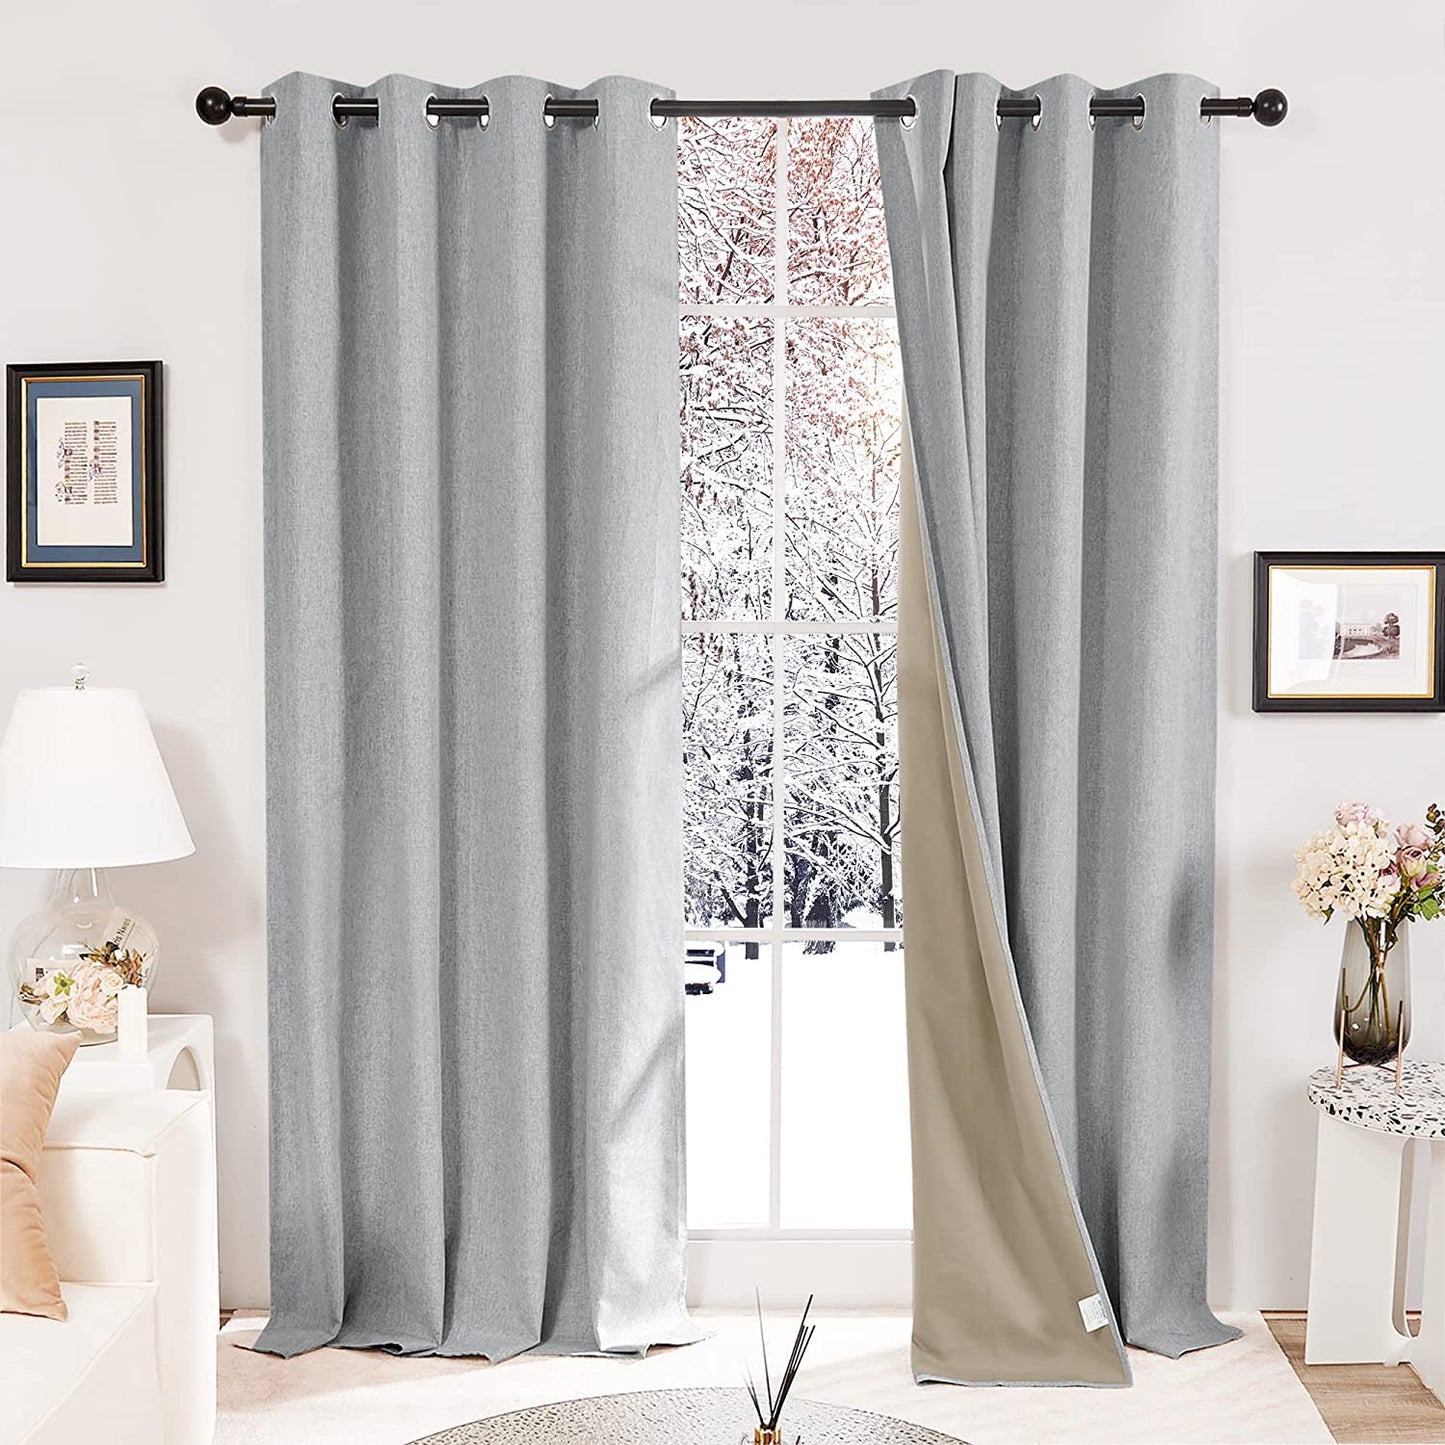 Deconovo Faux Linen Total Blackout Curtains 63 Inches Length, Light Blue, Grommet Thermal Insulated Curtain, Noise Reduction Draperies for Bedroom Living Room, 52" W X 63" L, 1 Pair  DECONOVO Dark Grey 52Wx108L Inch 